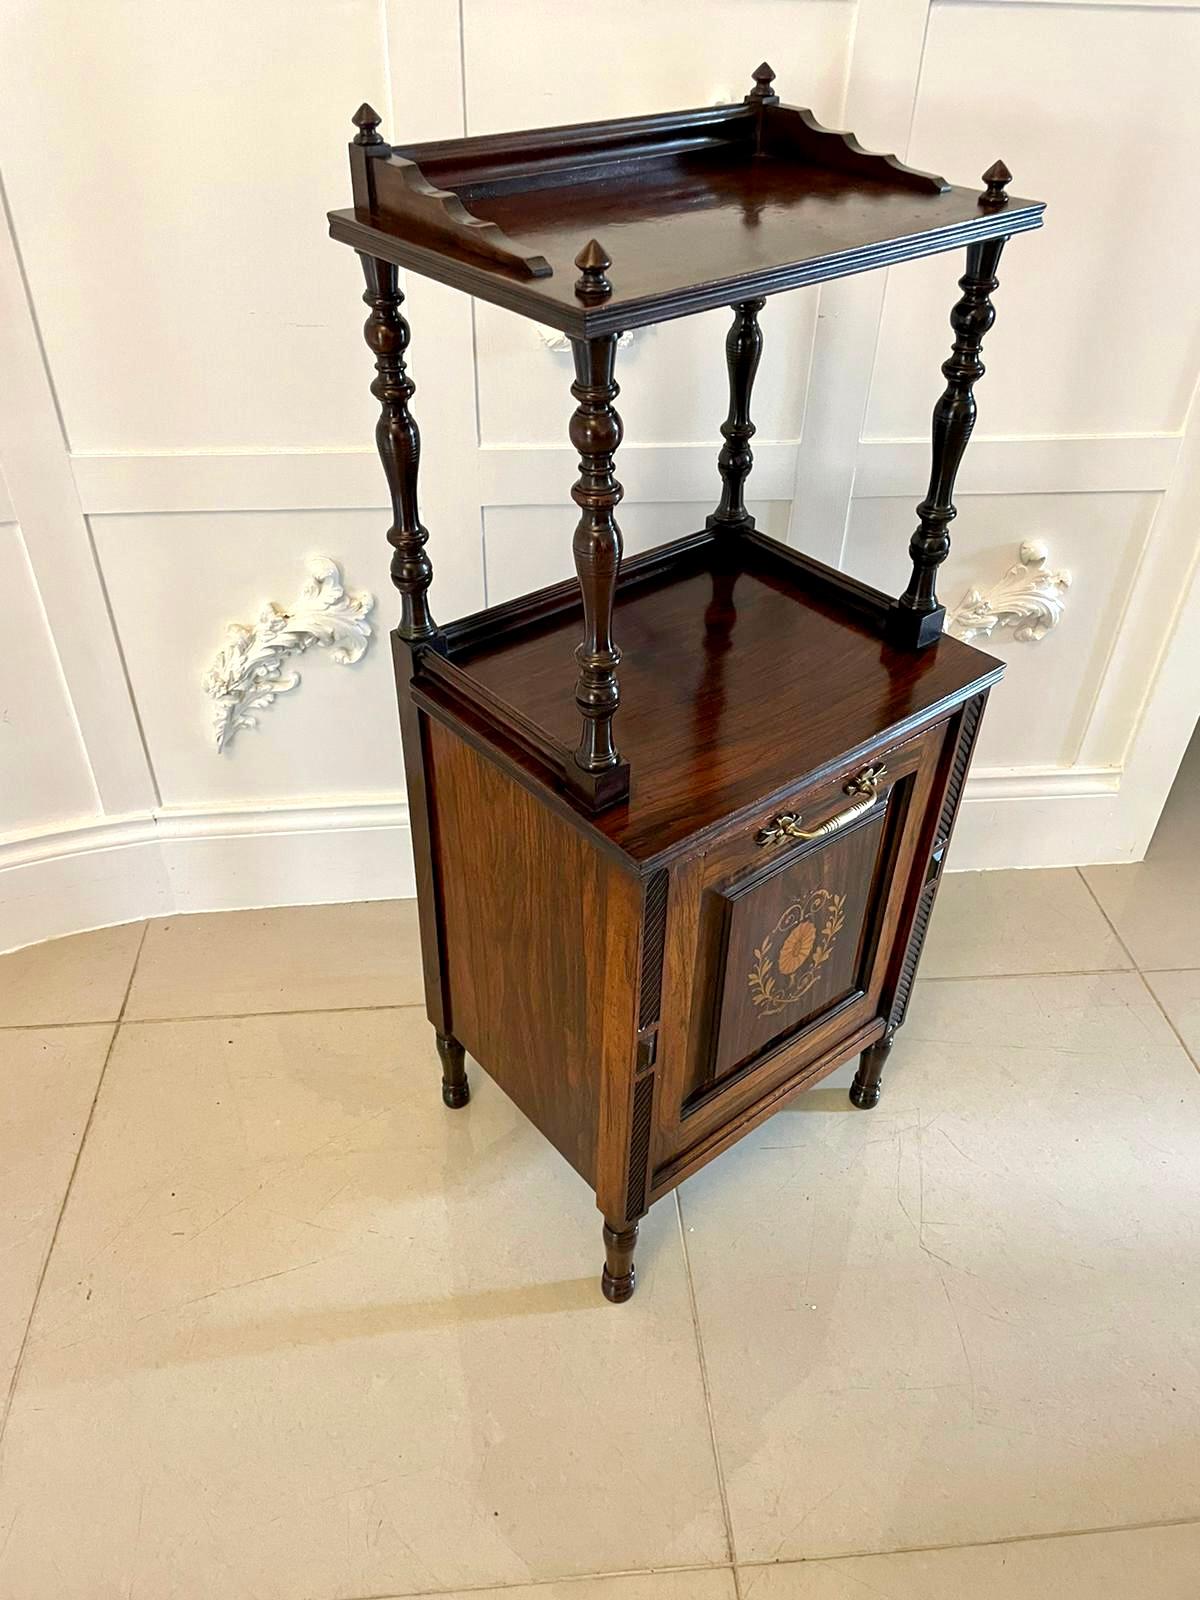 Antique Victorian quality rosewood marquetry inlaid coal box having a quality rosewood top supported by four turned columns above a quality rosewood marquetry inlaid coal box with a pull down front, original brass handle opening to reveal the